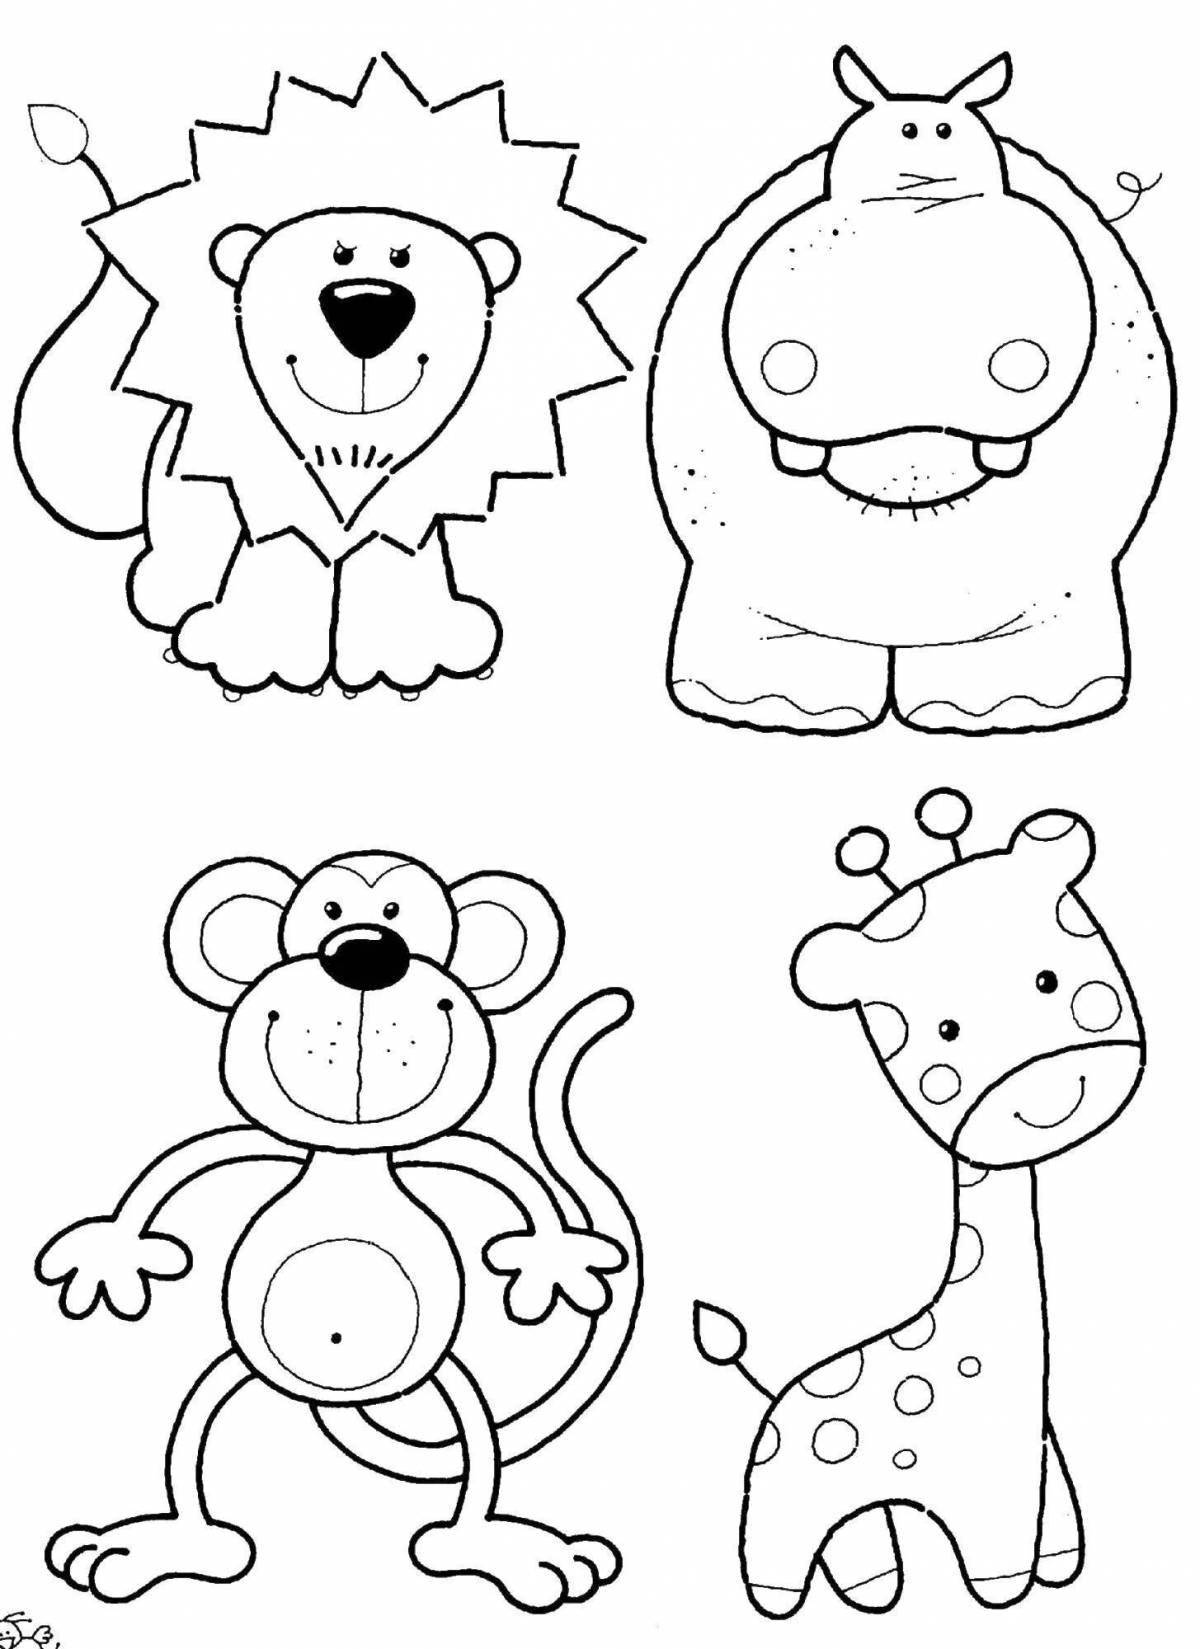 Fancy animal coloring pages